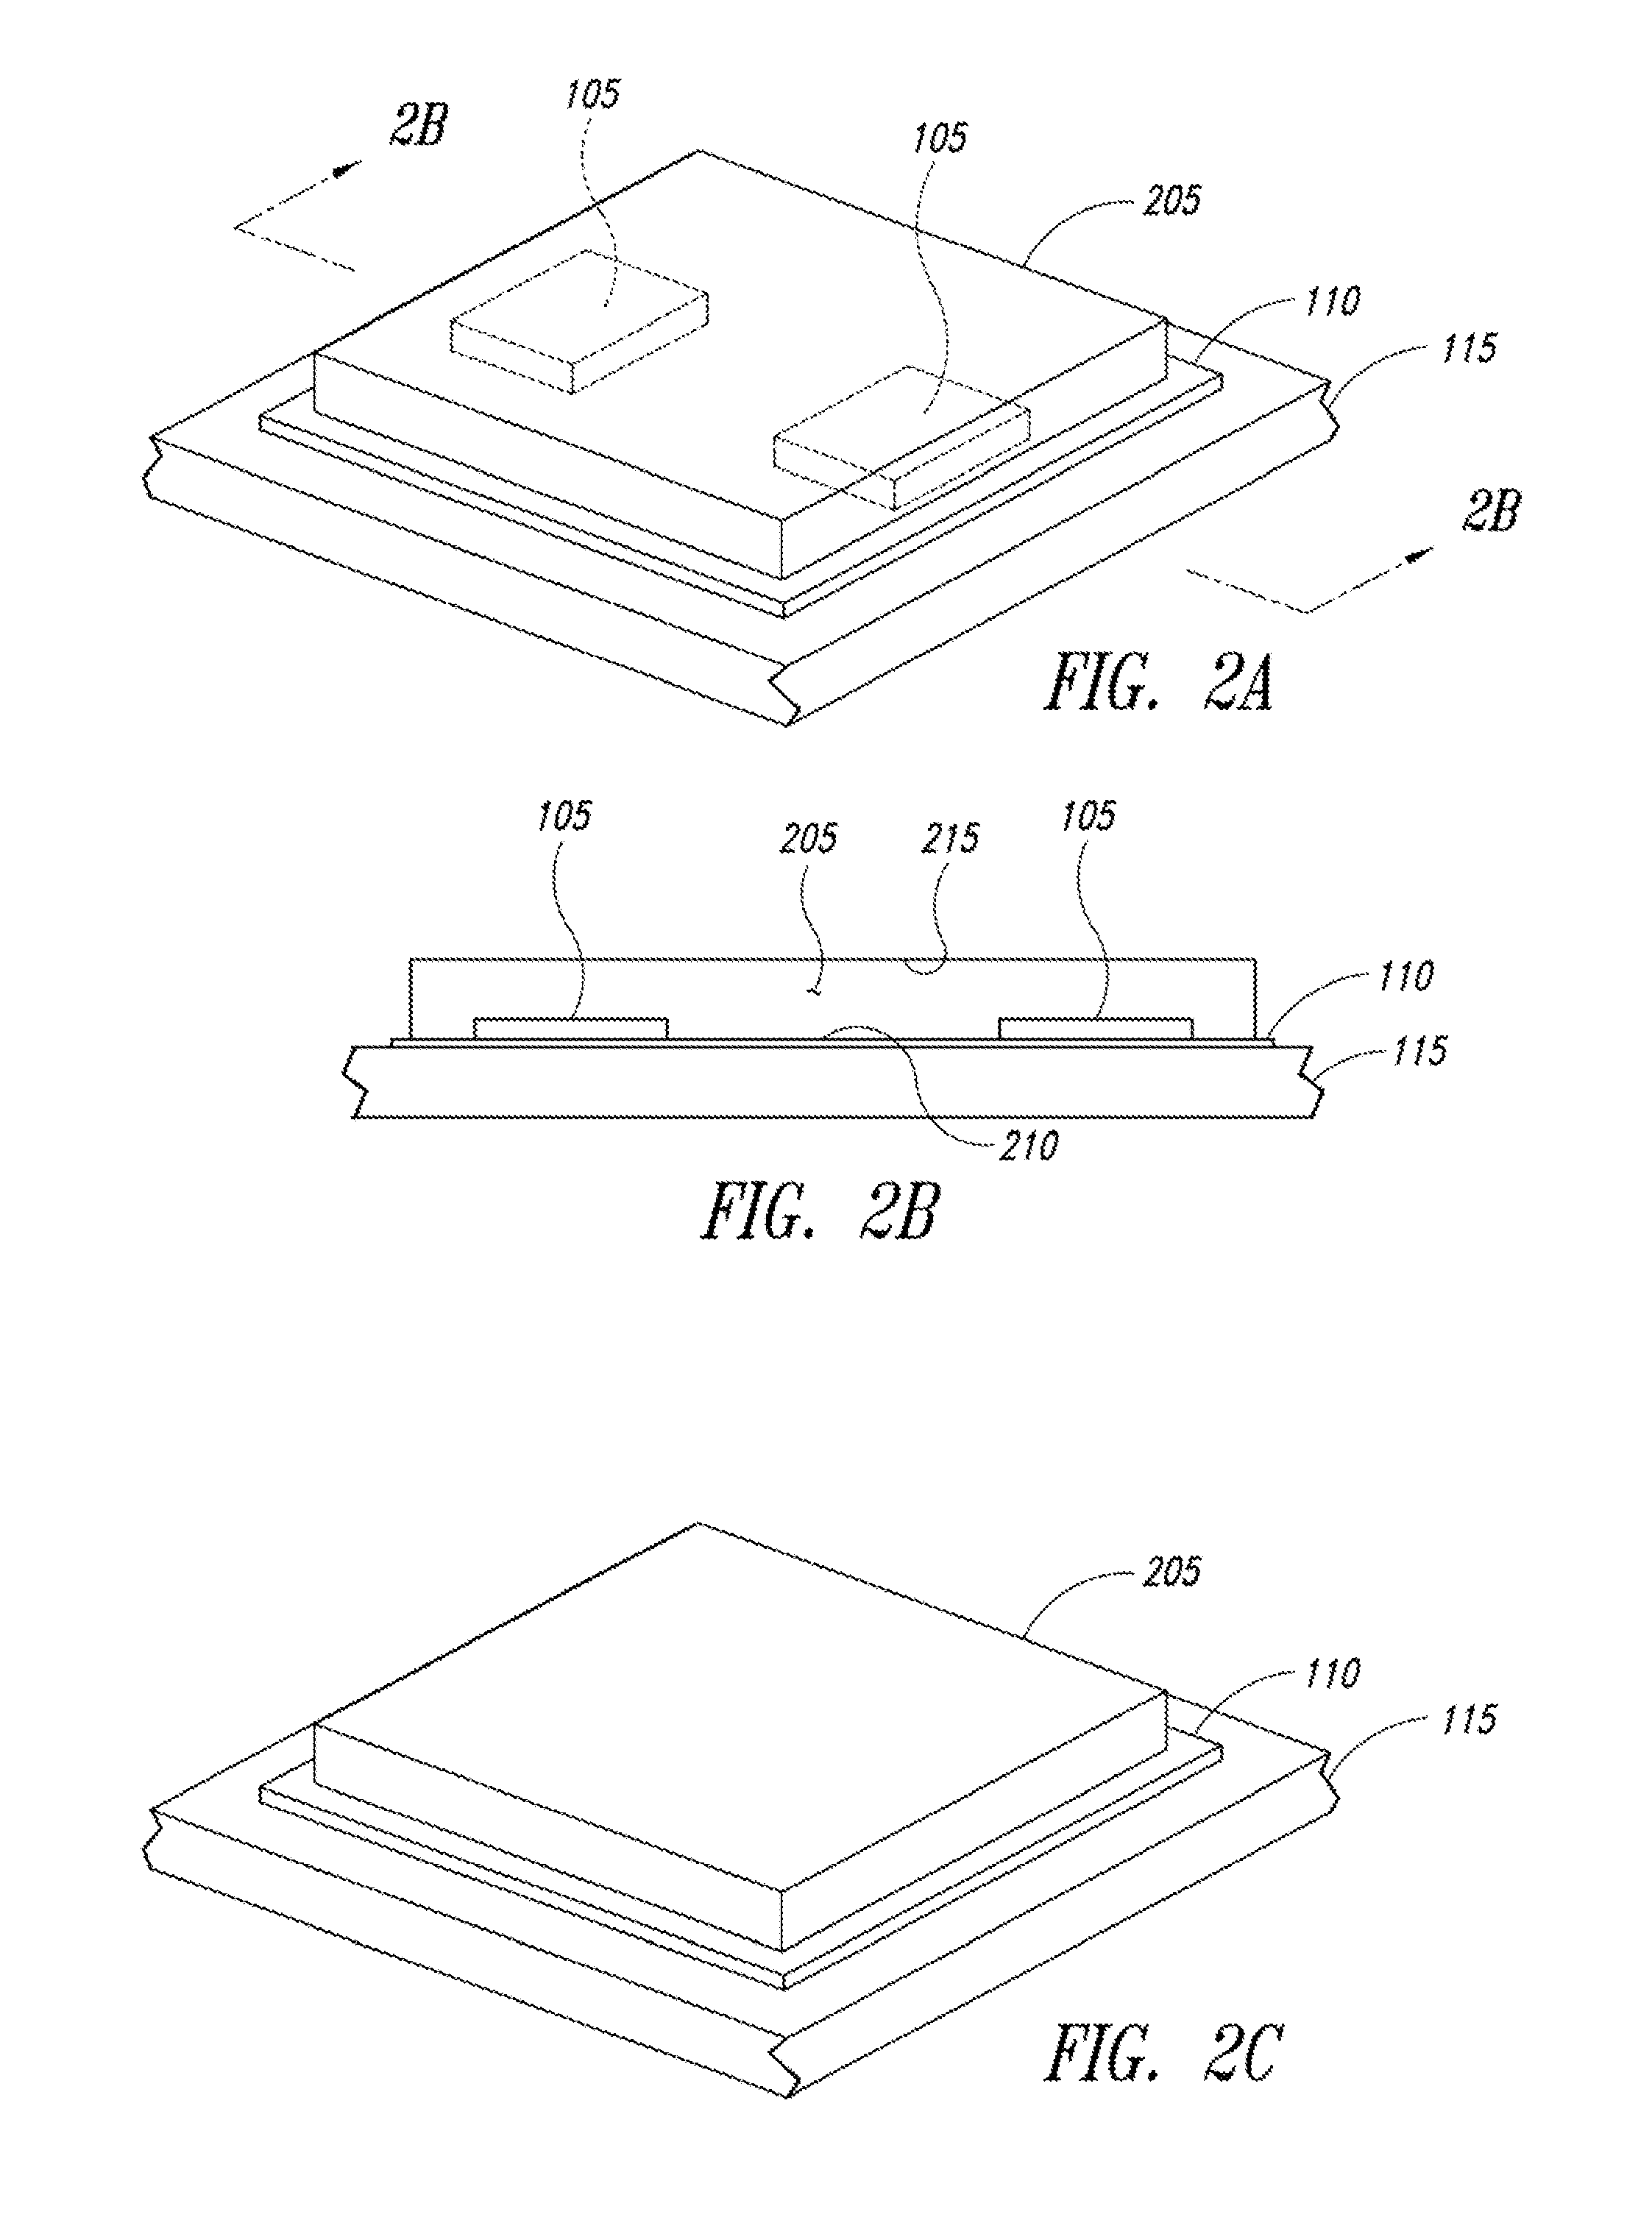 Embedded wafer level ball grid array bar systems and methods